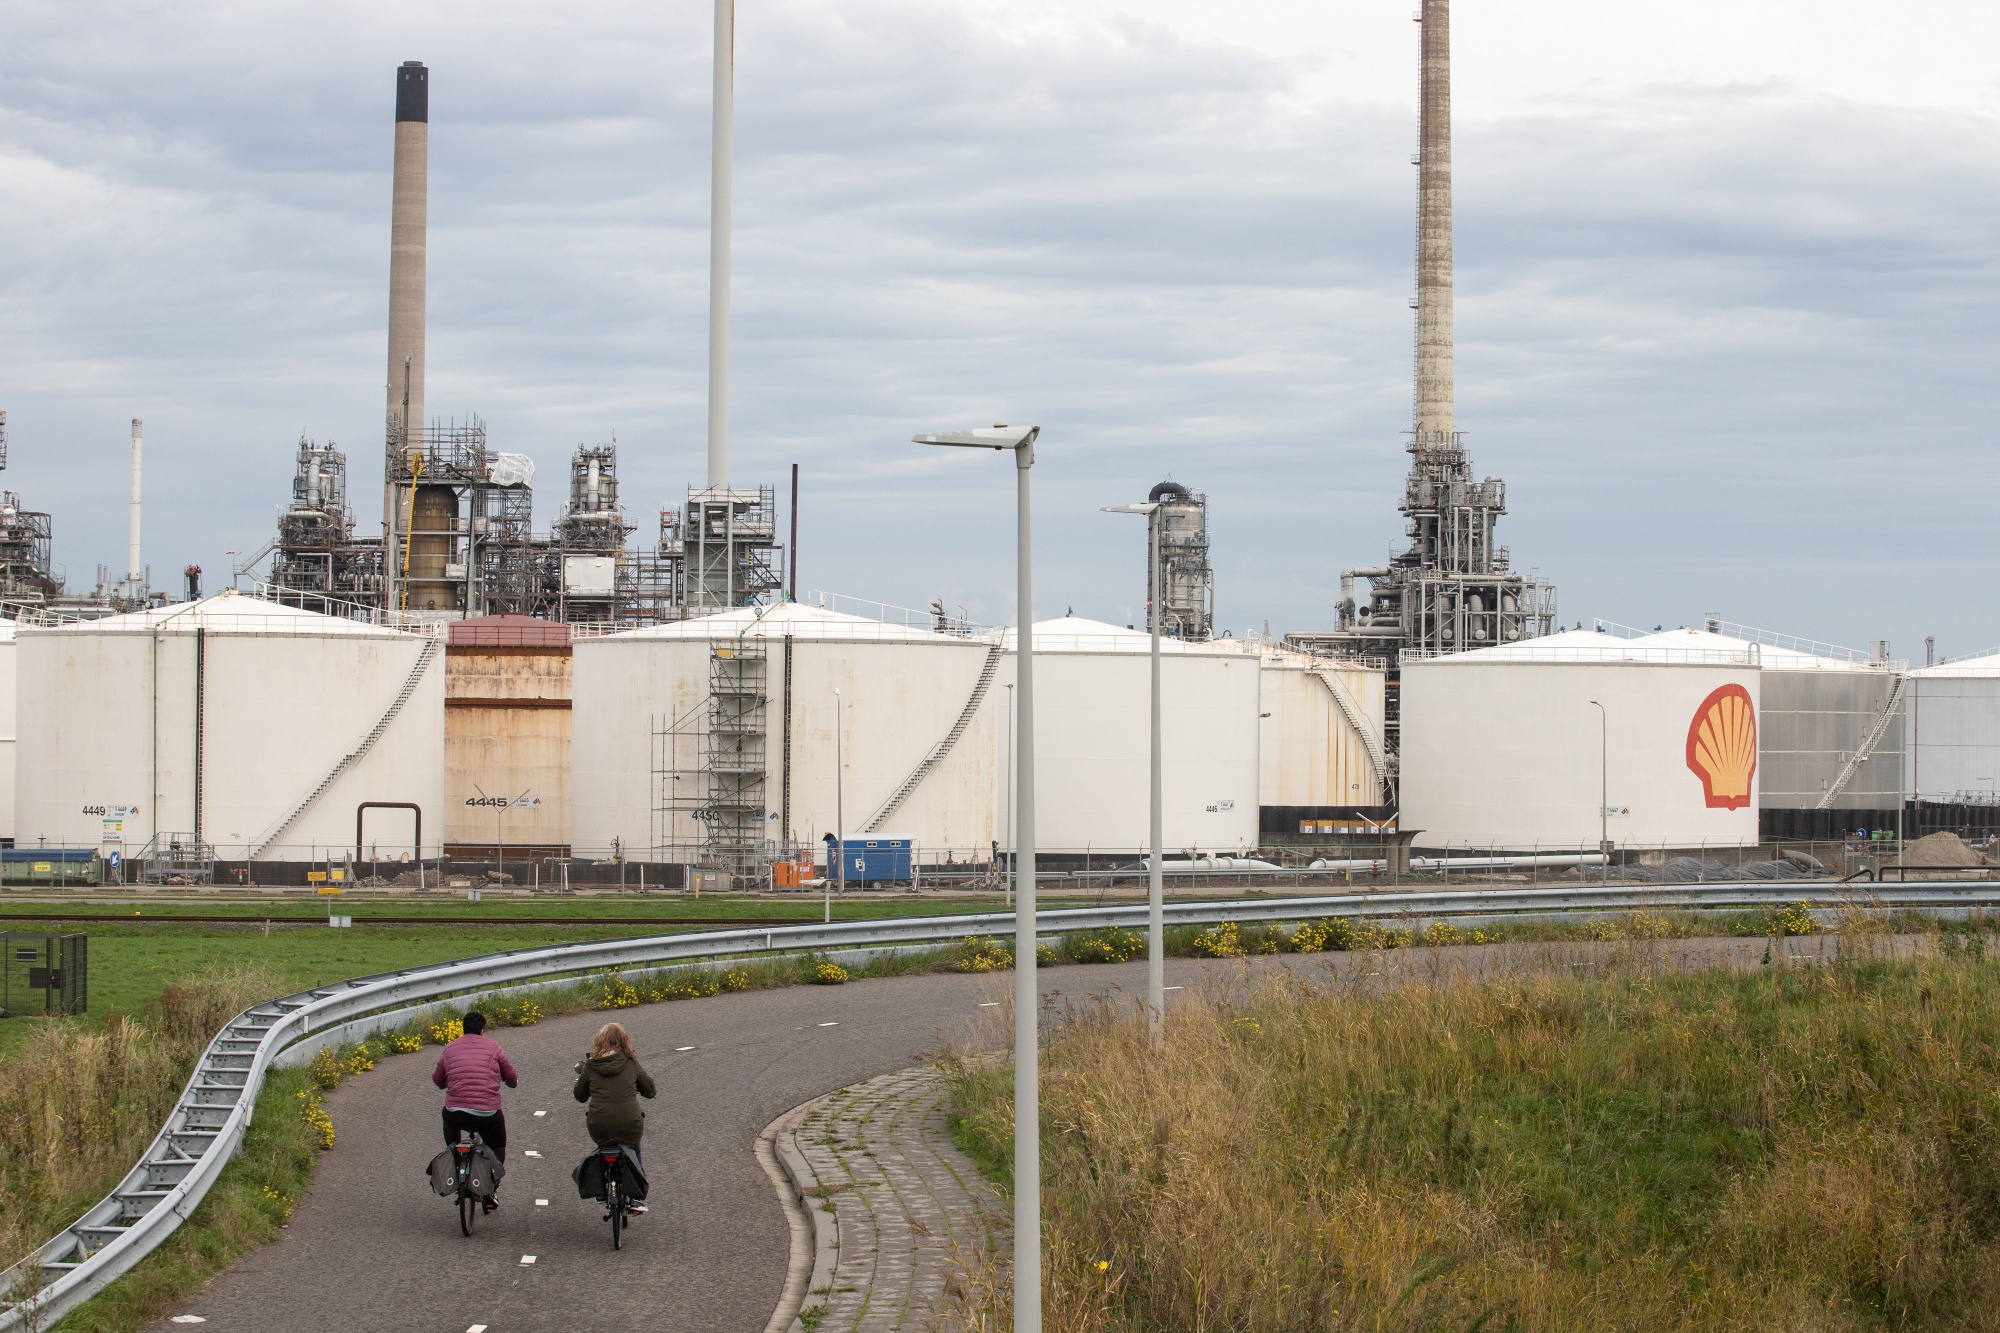 Oil storage silos at the Shell Plc Pernis refinery in Rotterdam.